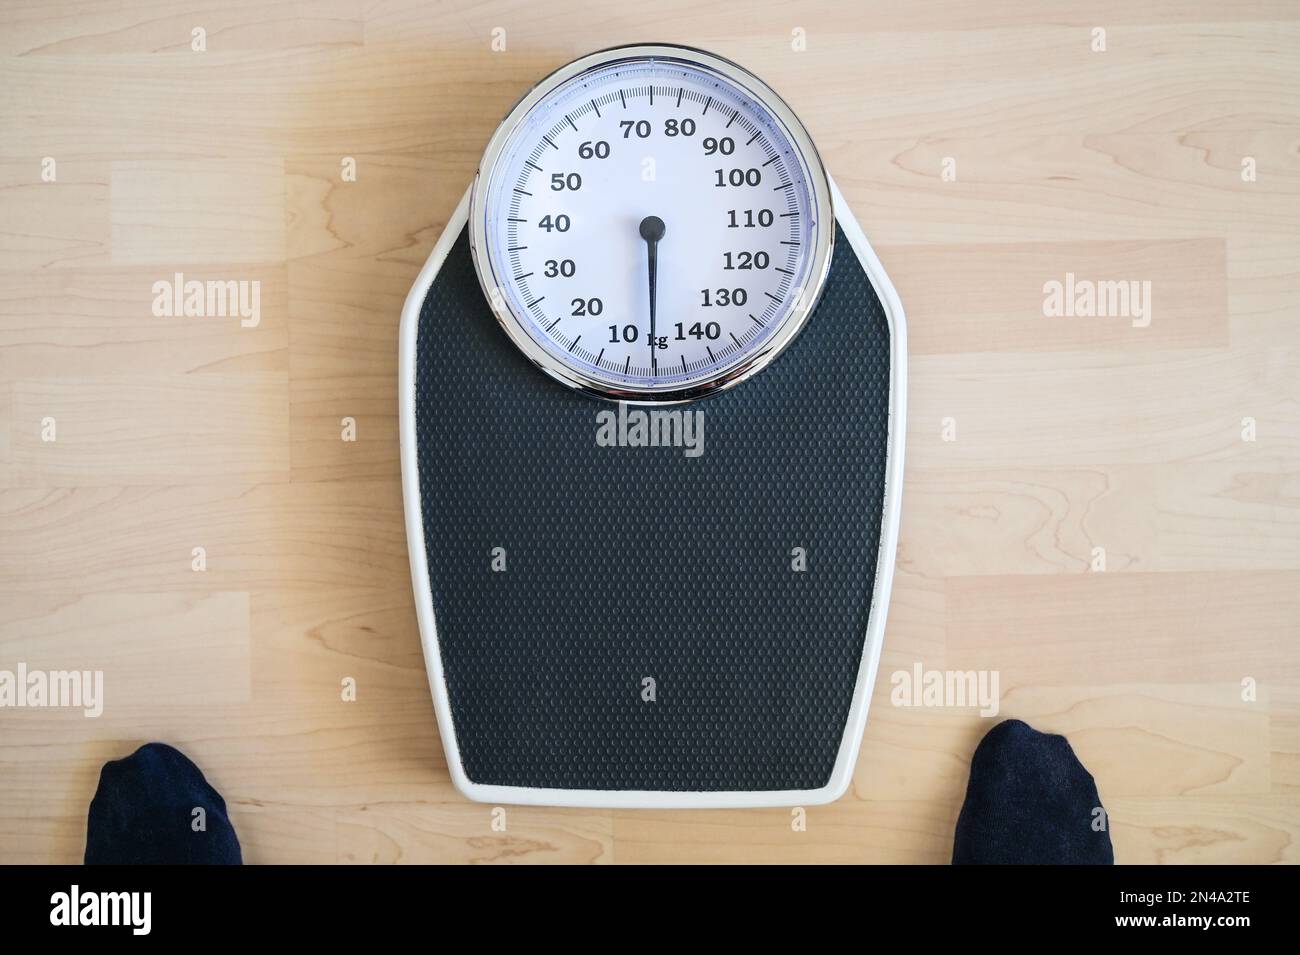 Analogue old-fashioned personal scale on a wooden floor, two feet in dark stockings hesitantly standing in front of it, worried about the weight, high Stock Photo